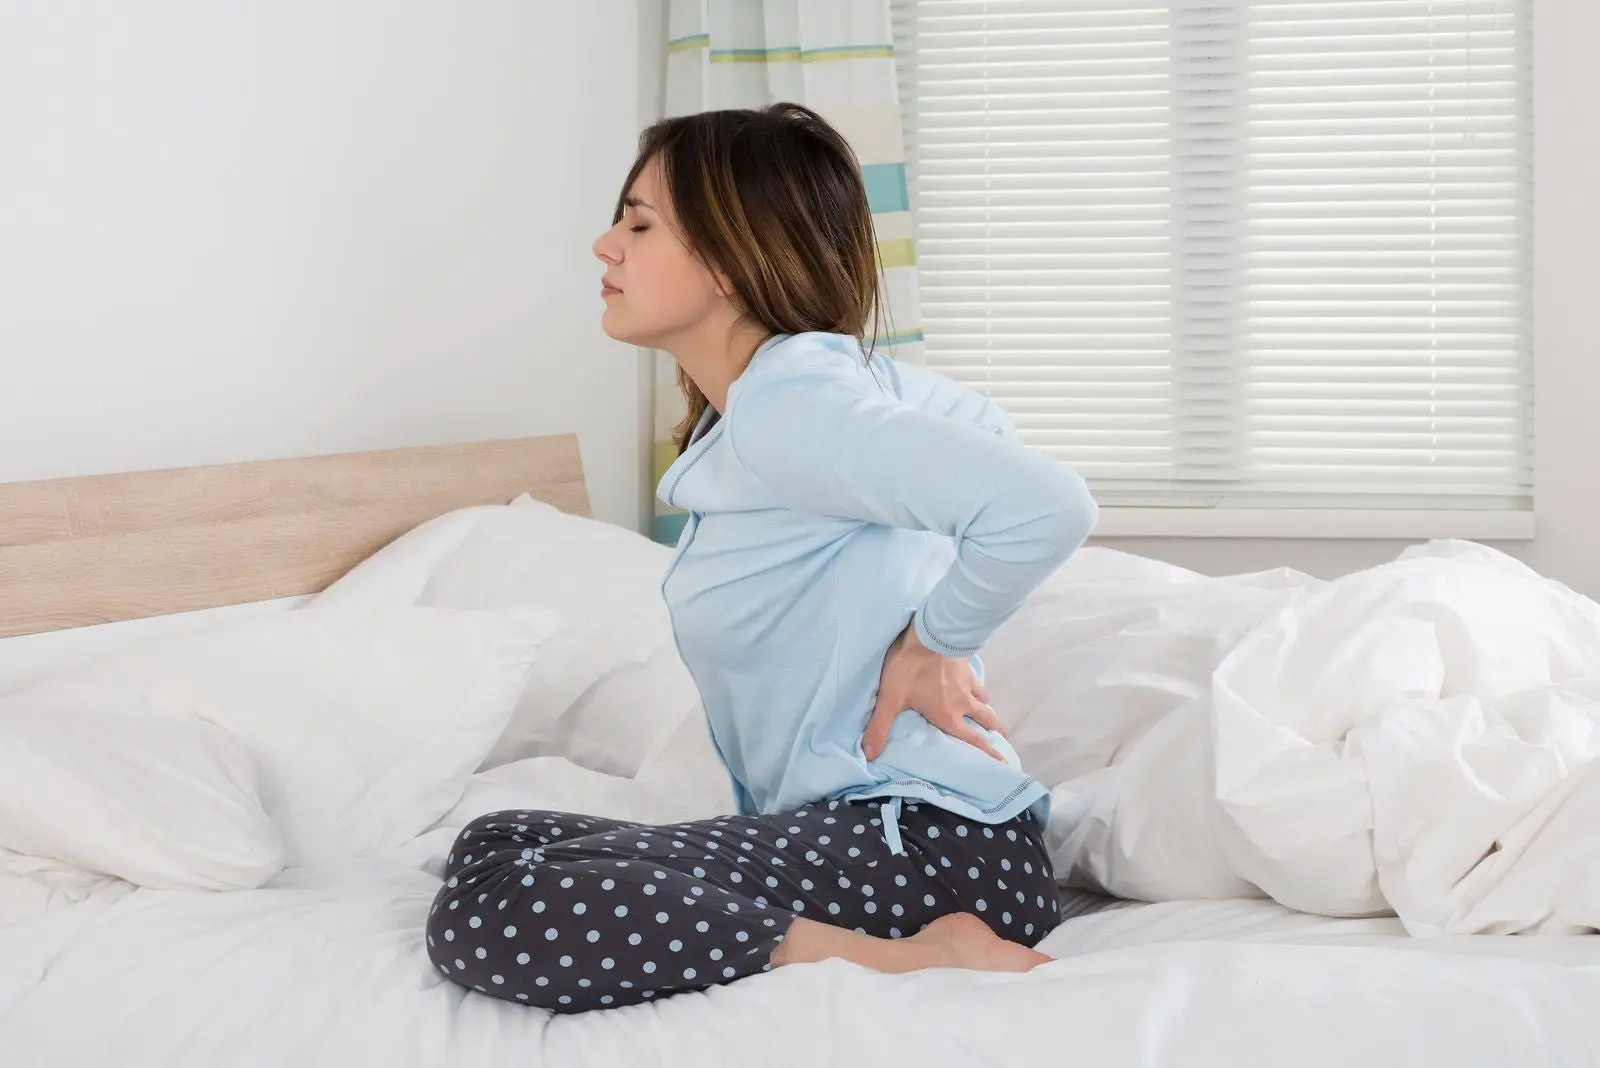 An Organic Latex Mattress Helps to Alleviate Severe Low Back Pain â The ...